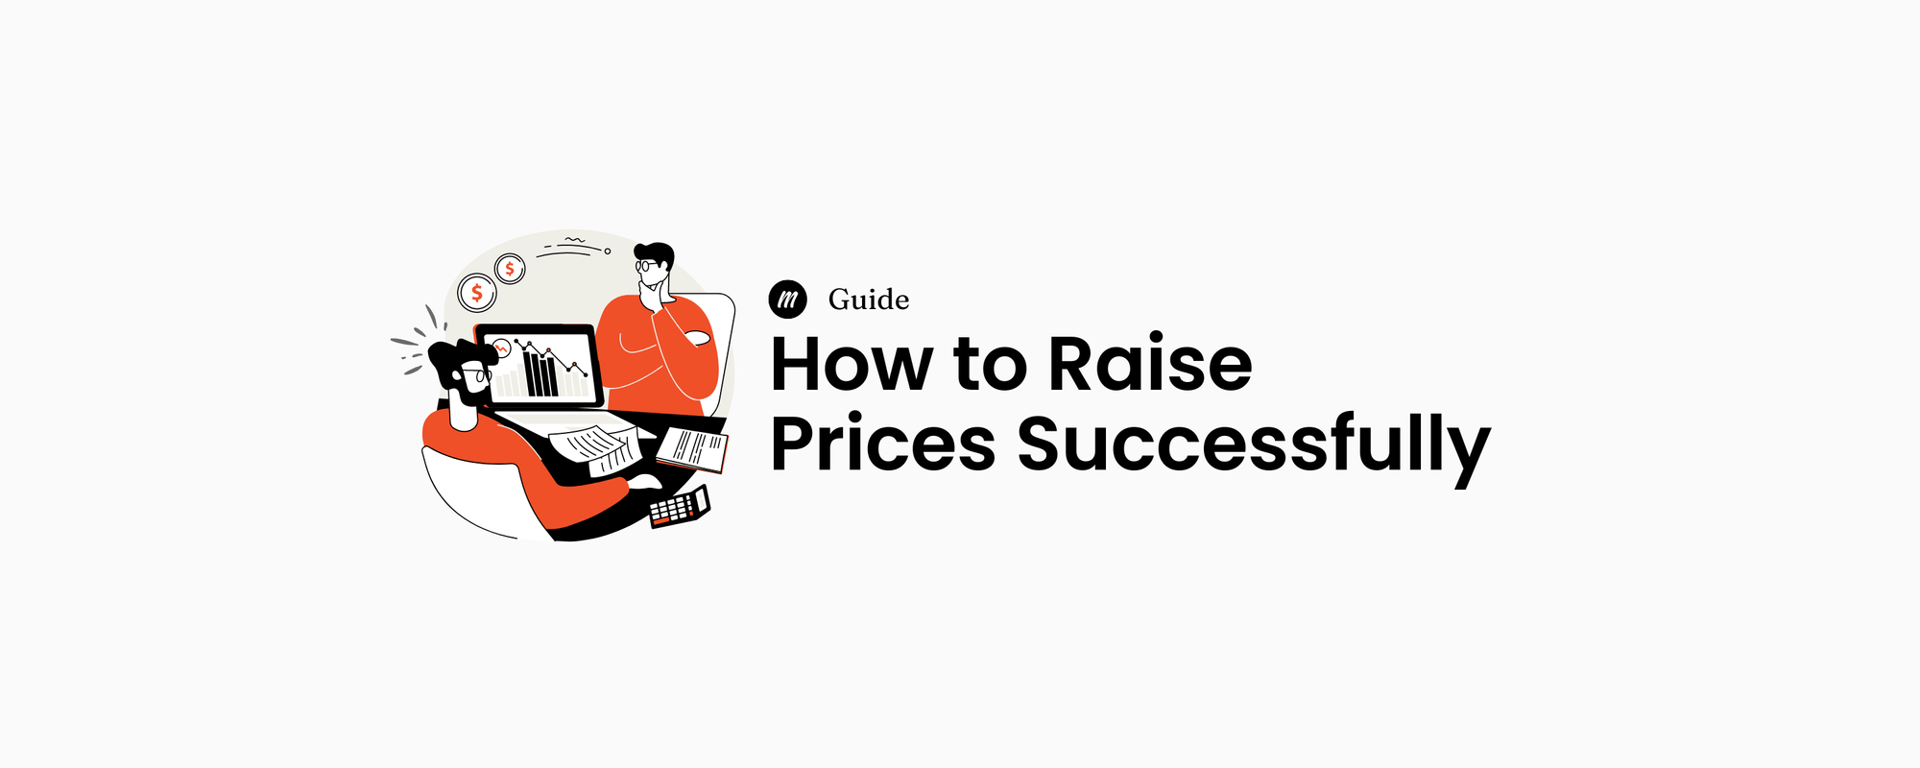 How to Raise Prices Successfully